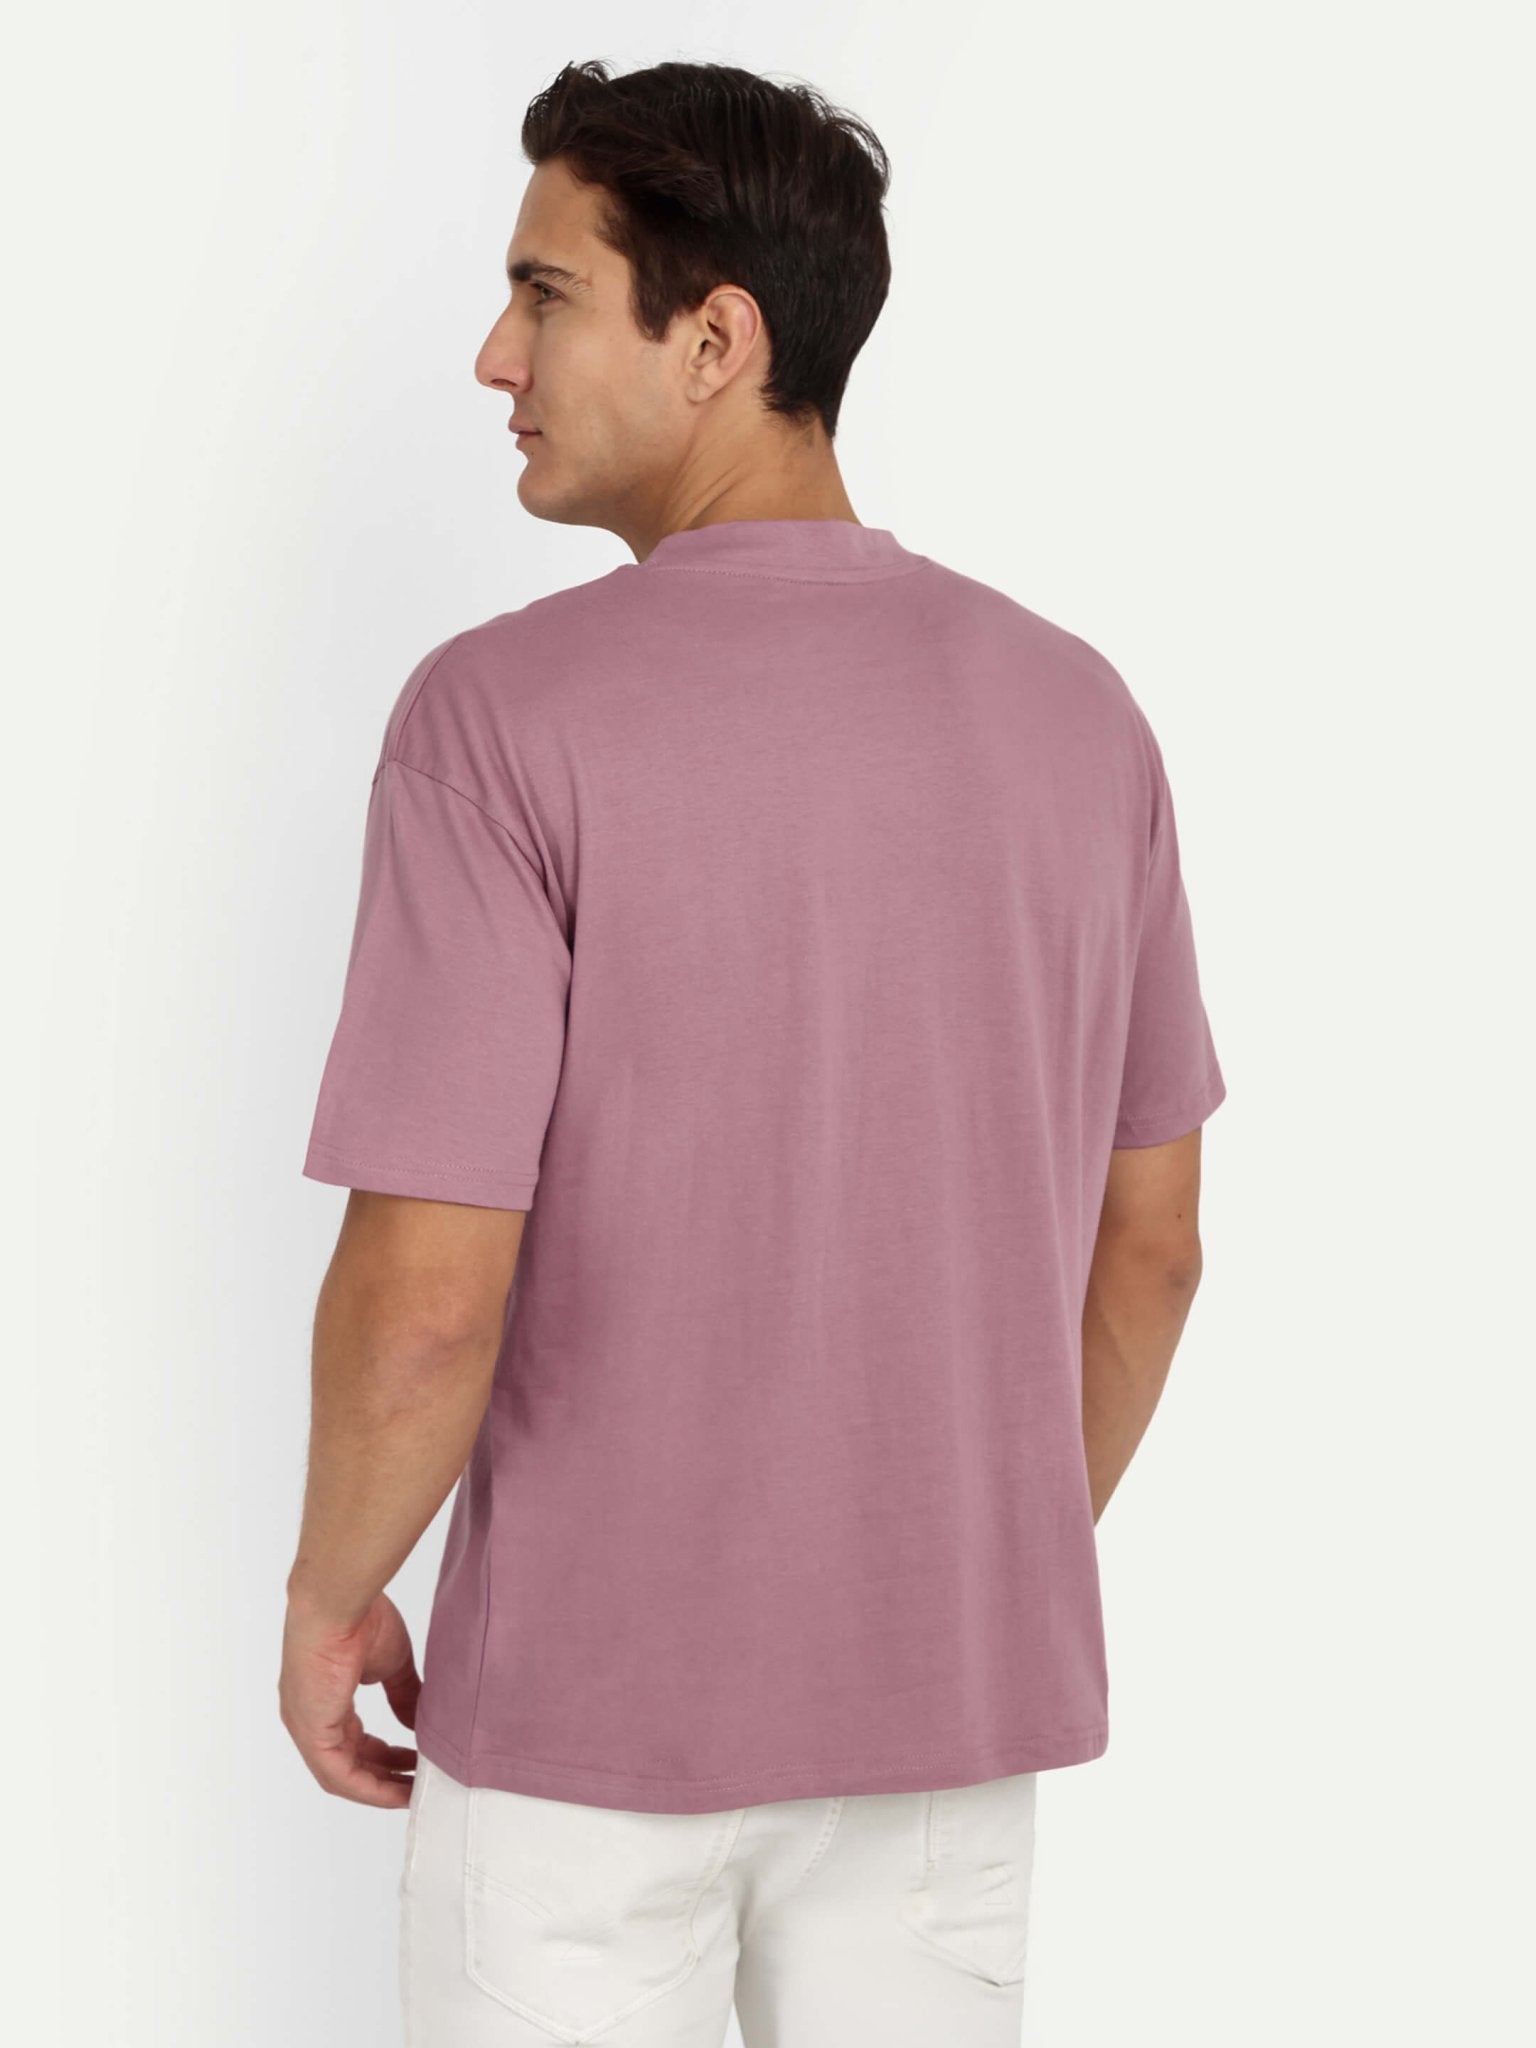 Relaxed Basic T-Shirt - Salmon Pink